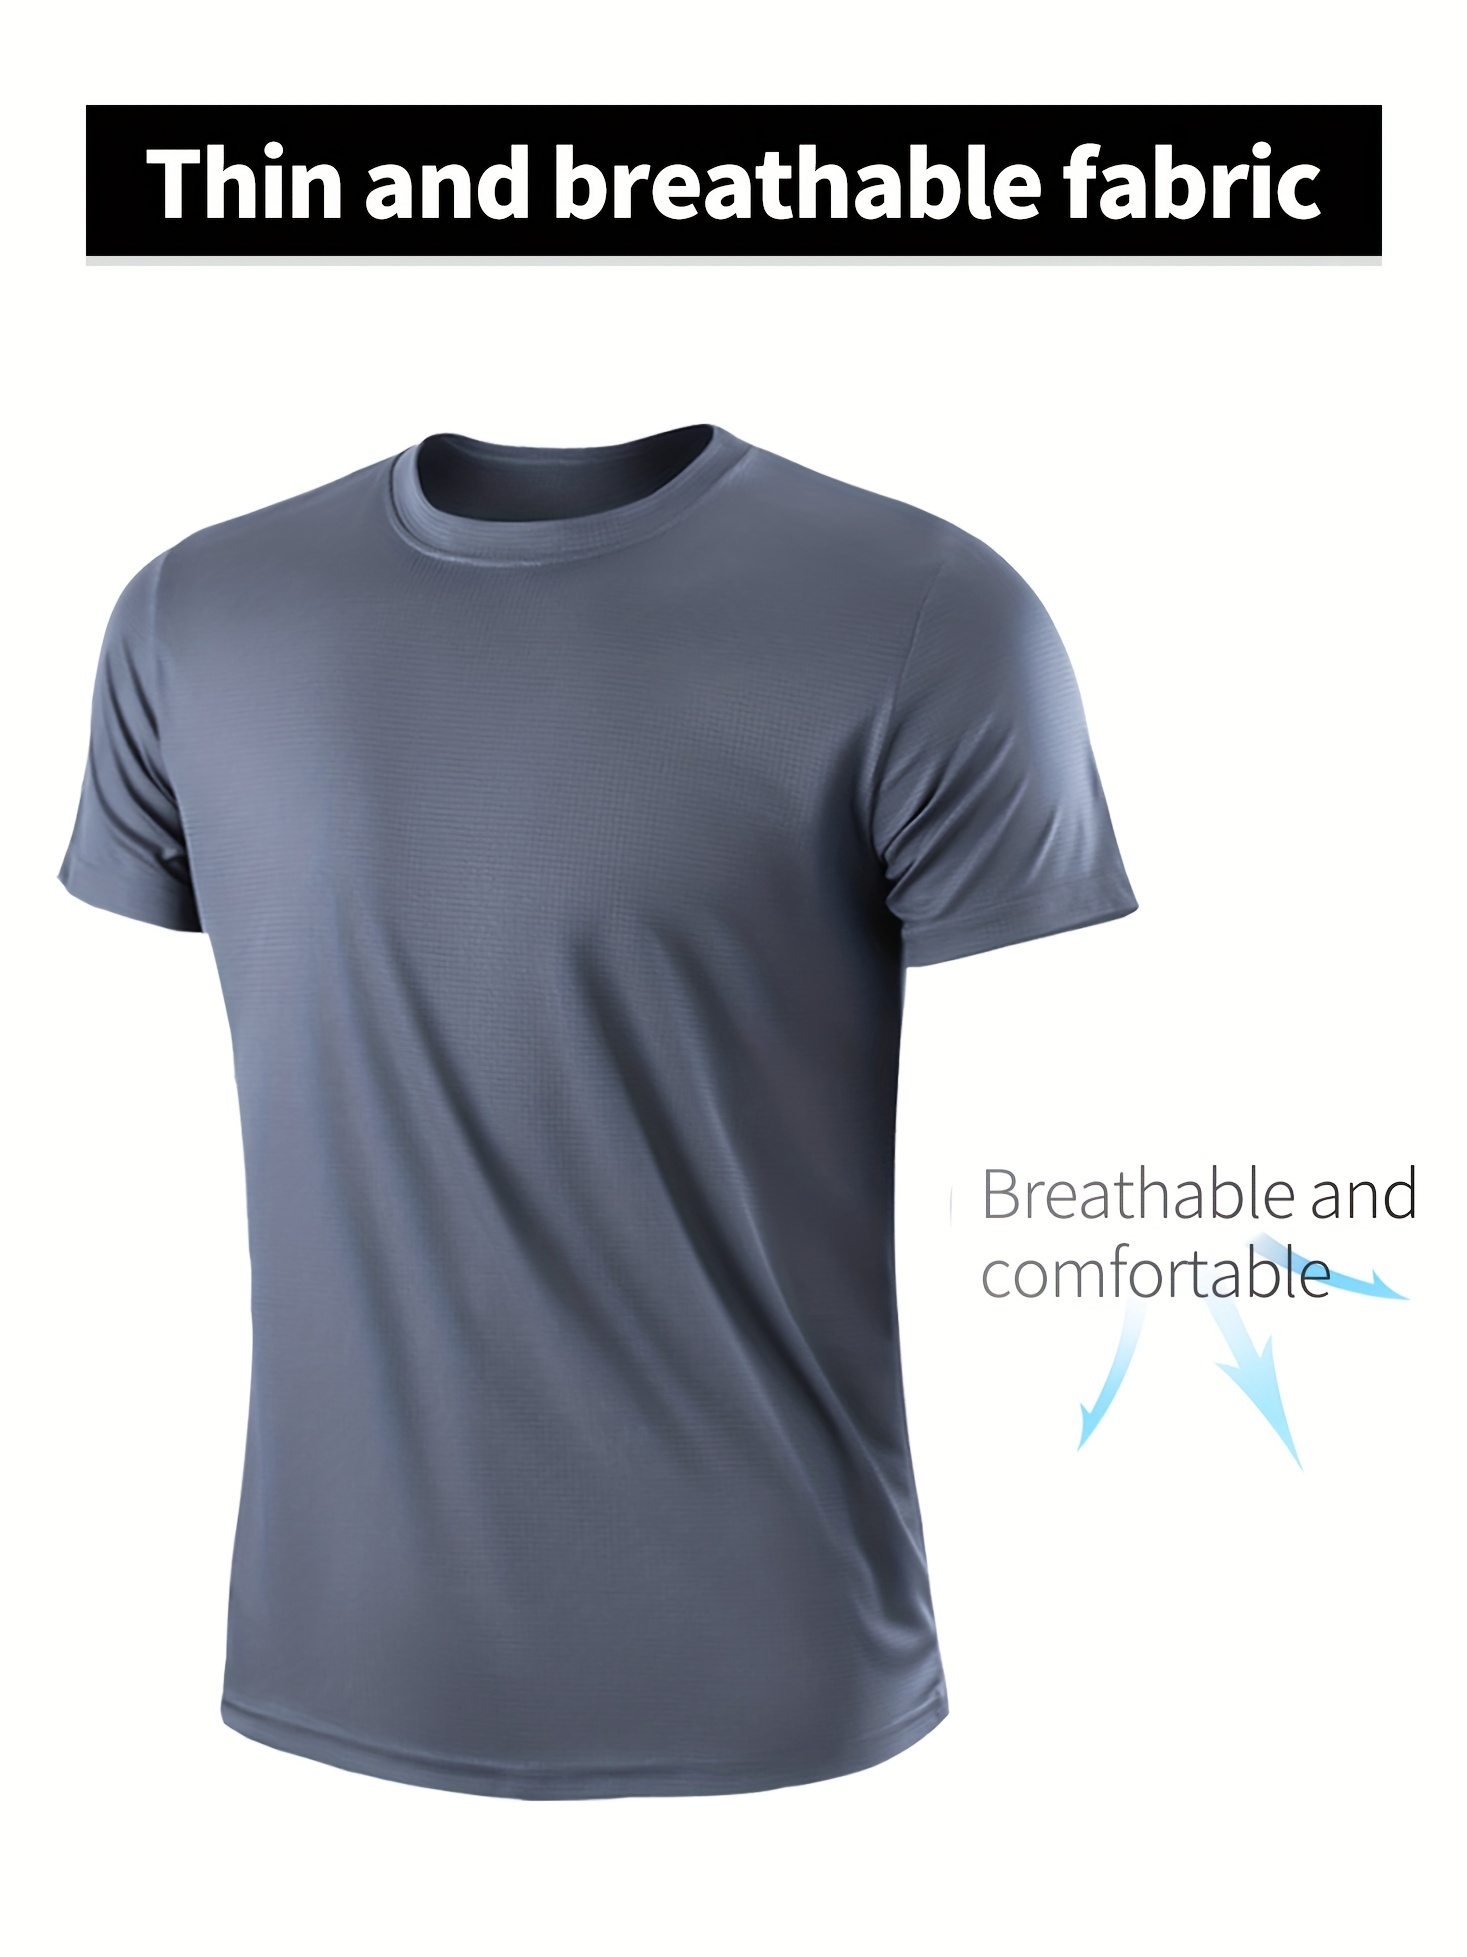 True North Strong & Free Relaxed Fit Ultra Soft T-Shirt